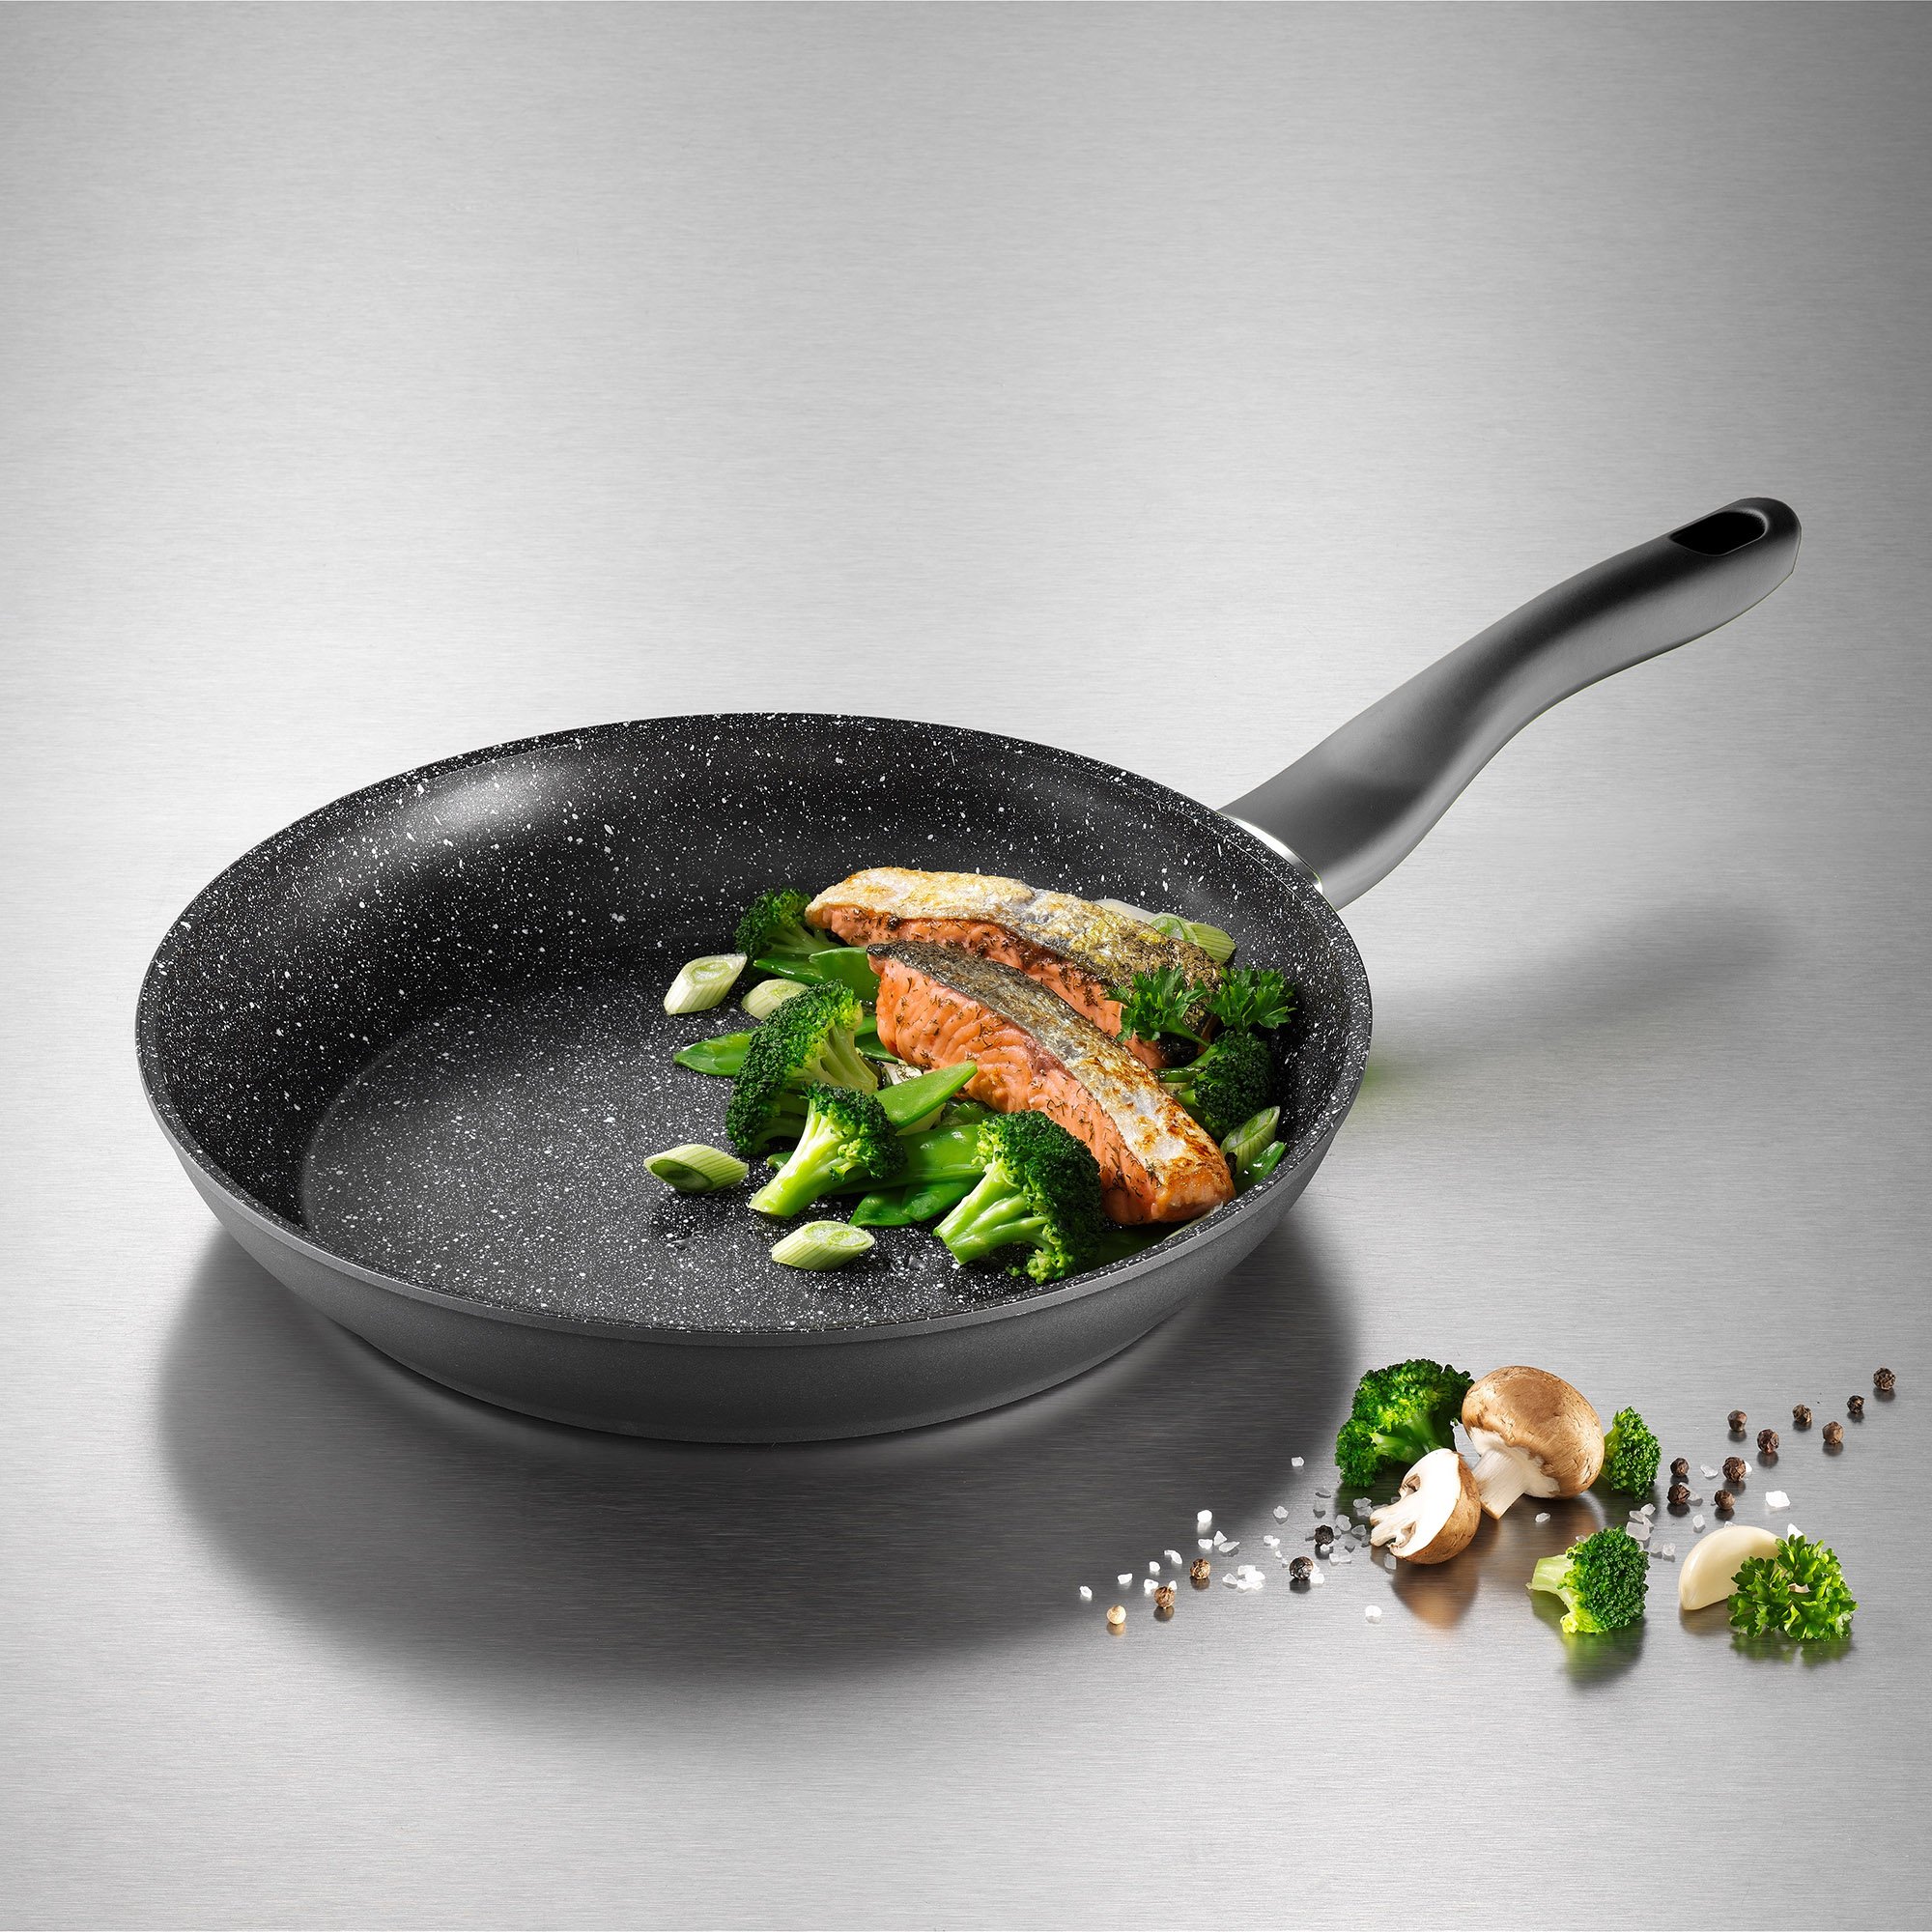 STONELINE® FRESH frying pan 28 cm, Made in Germany, non-stick, induction and oven-safe